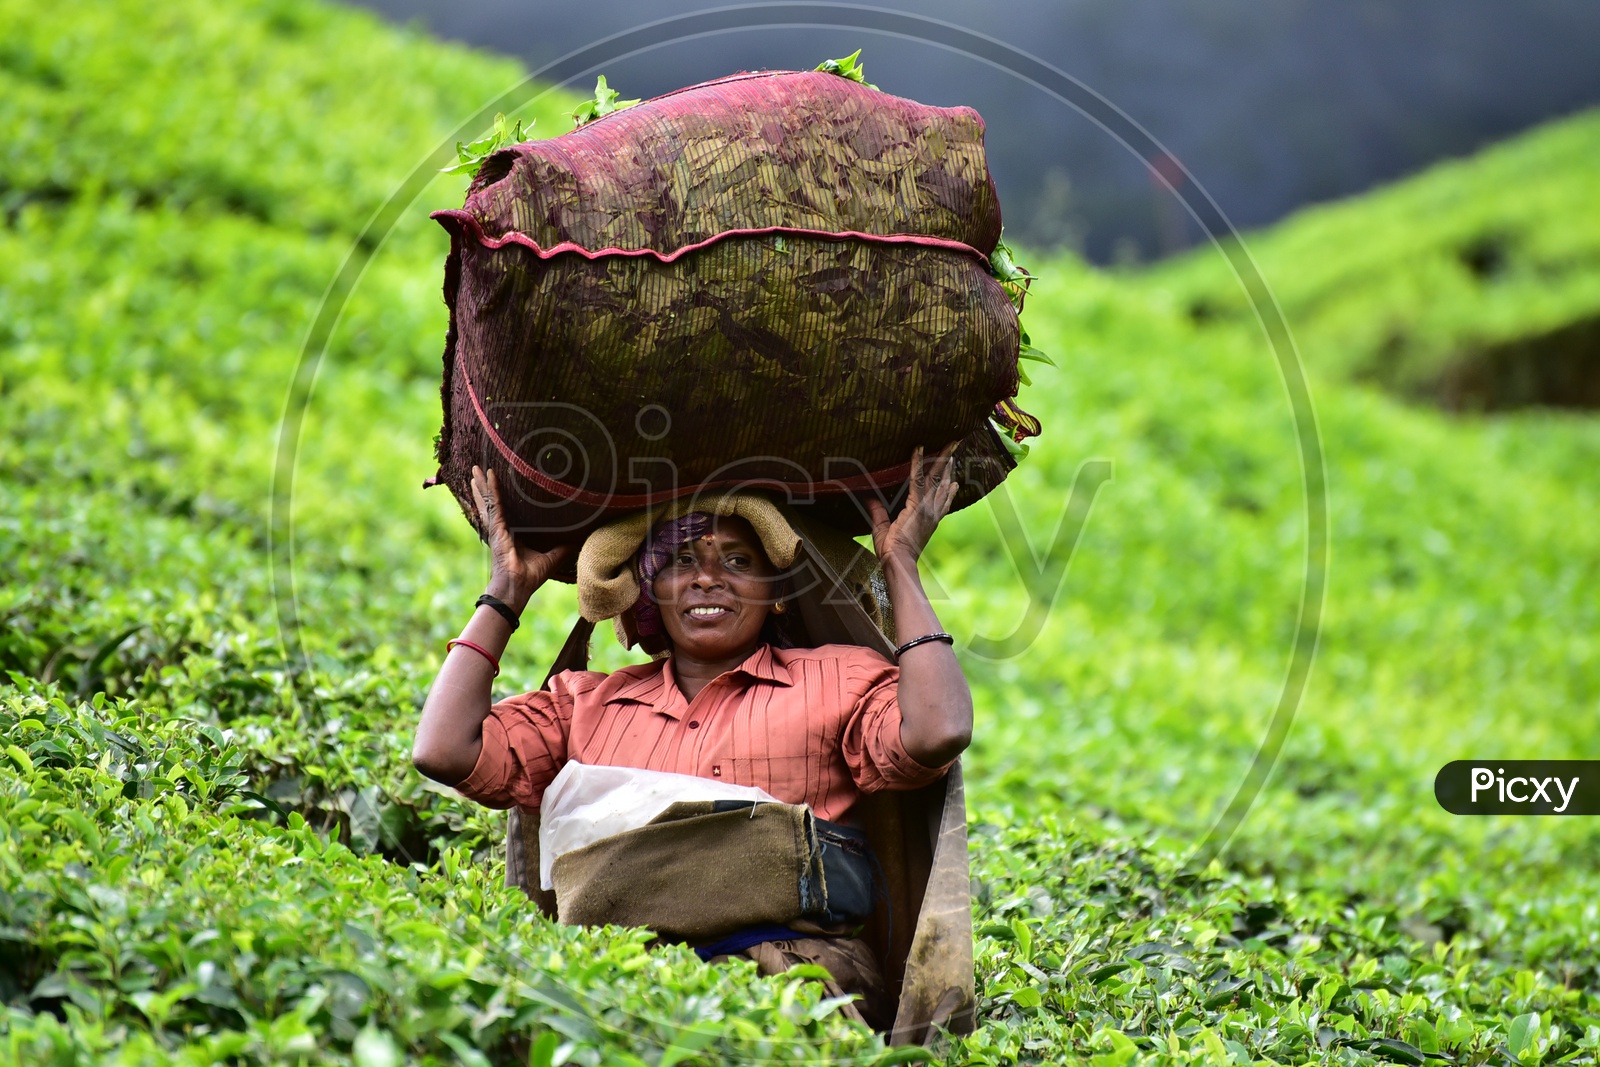 Female worker carrying Tea Bag on her Head in Munnar Tea Plantations